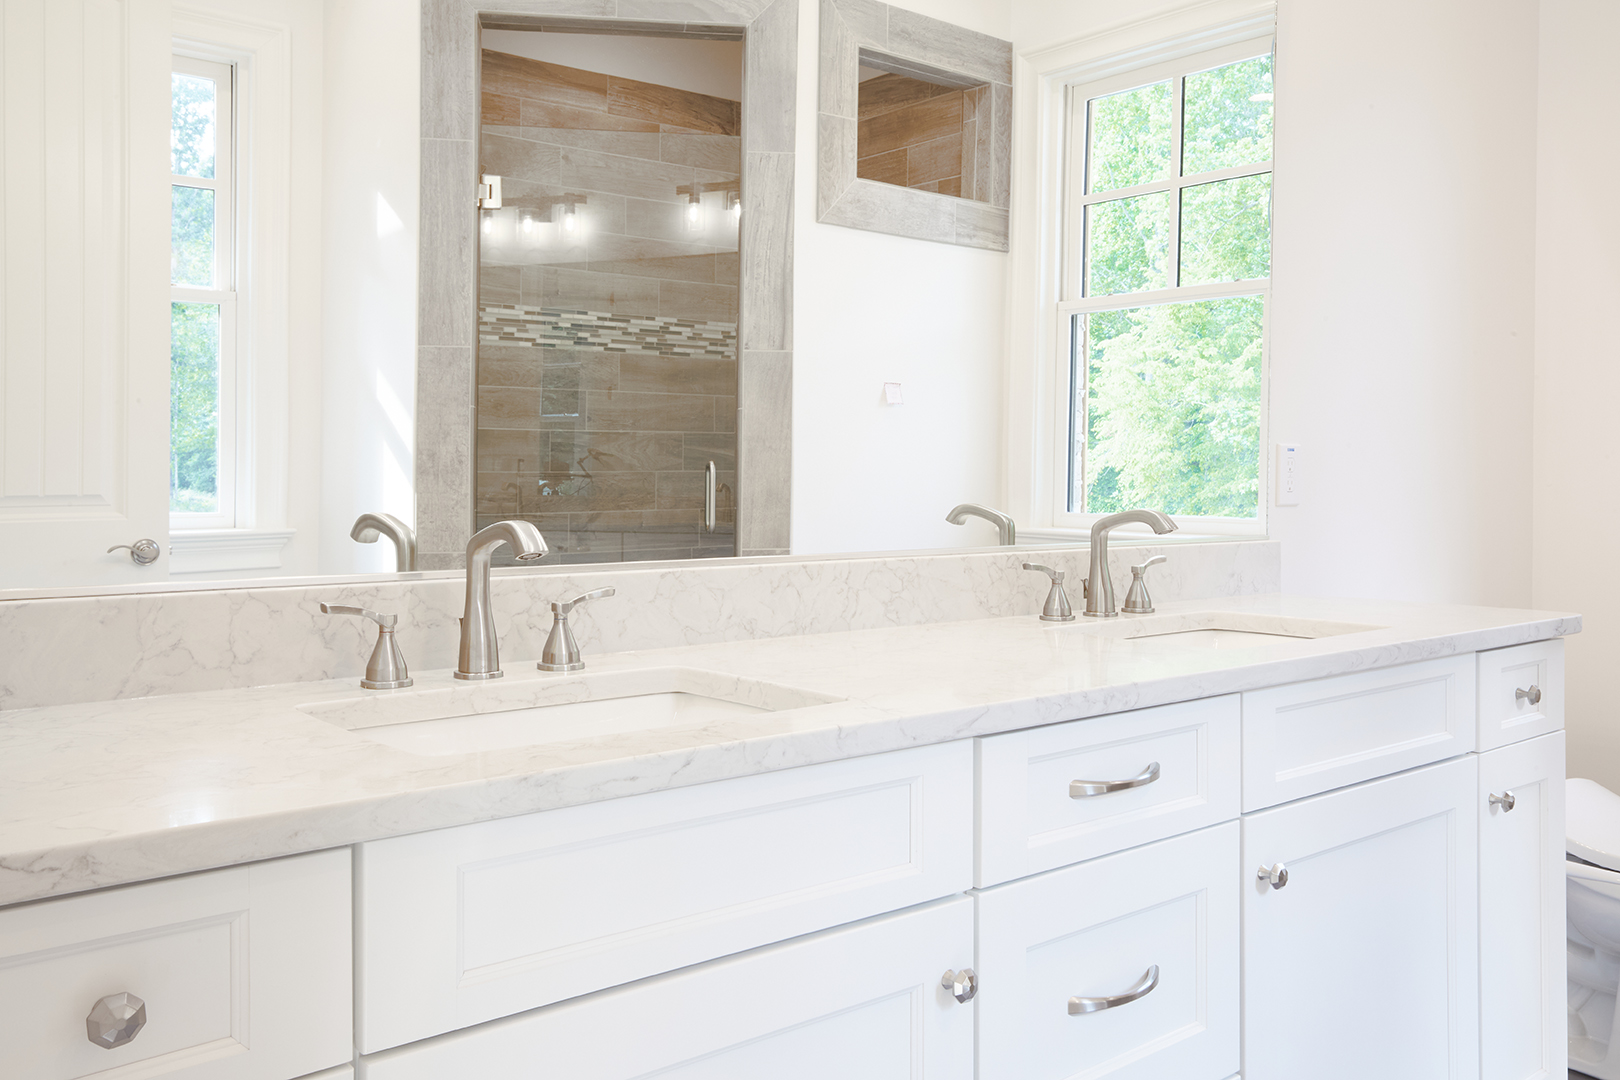 How to Choose Cohesive Bathroom Plumbing Fixtures - Room for Tuesday